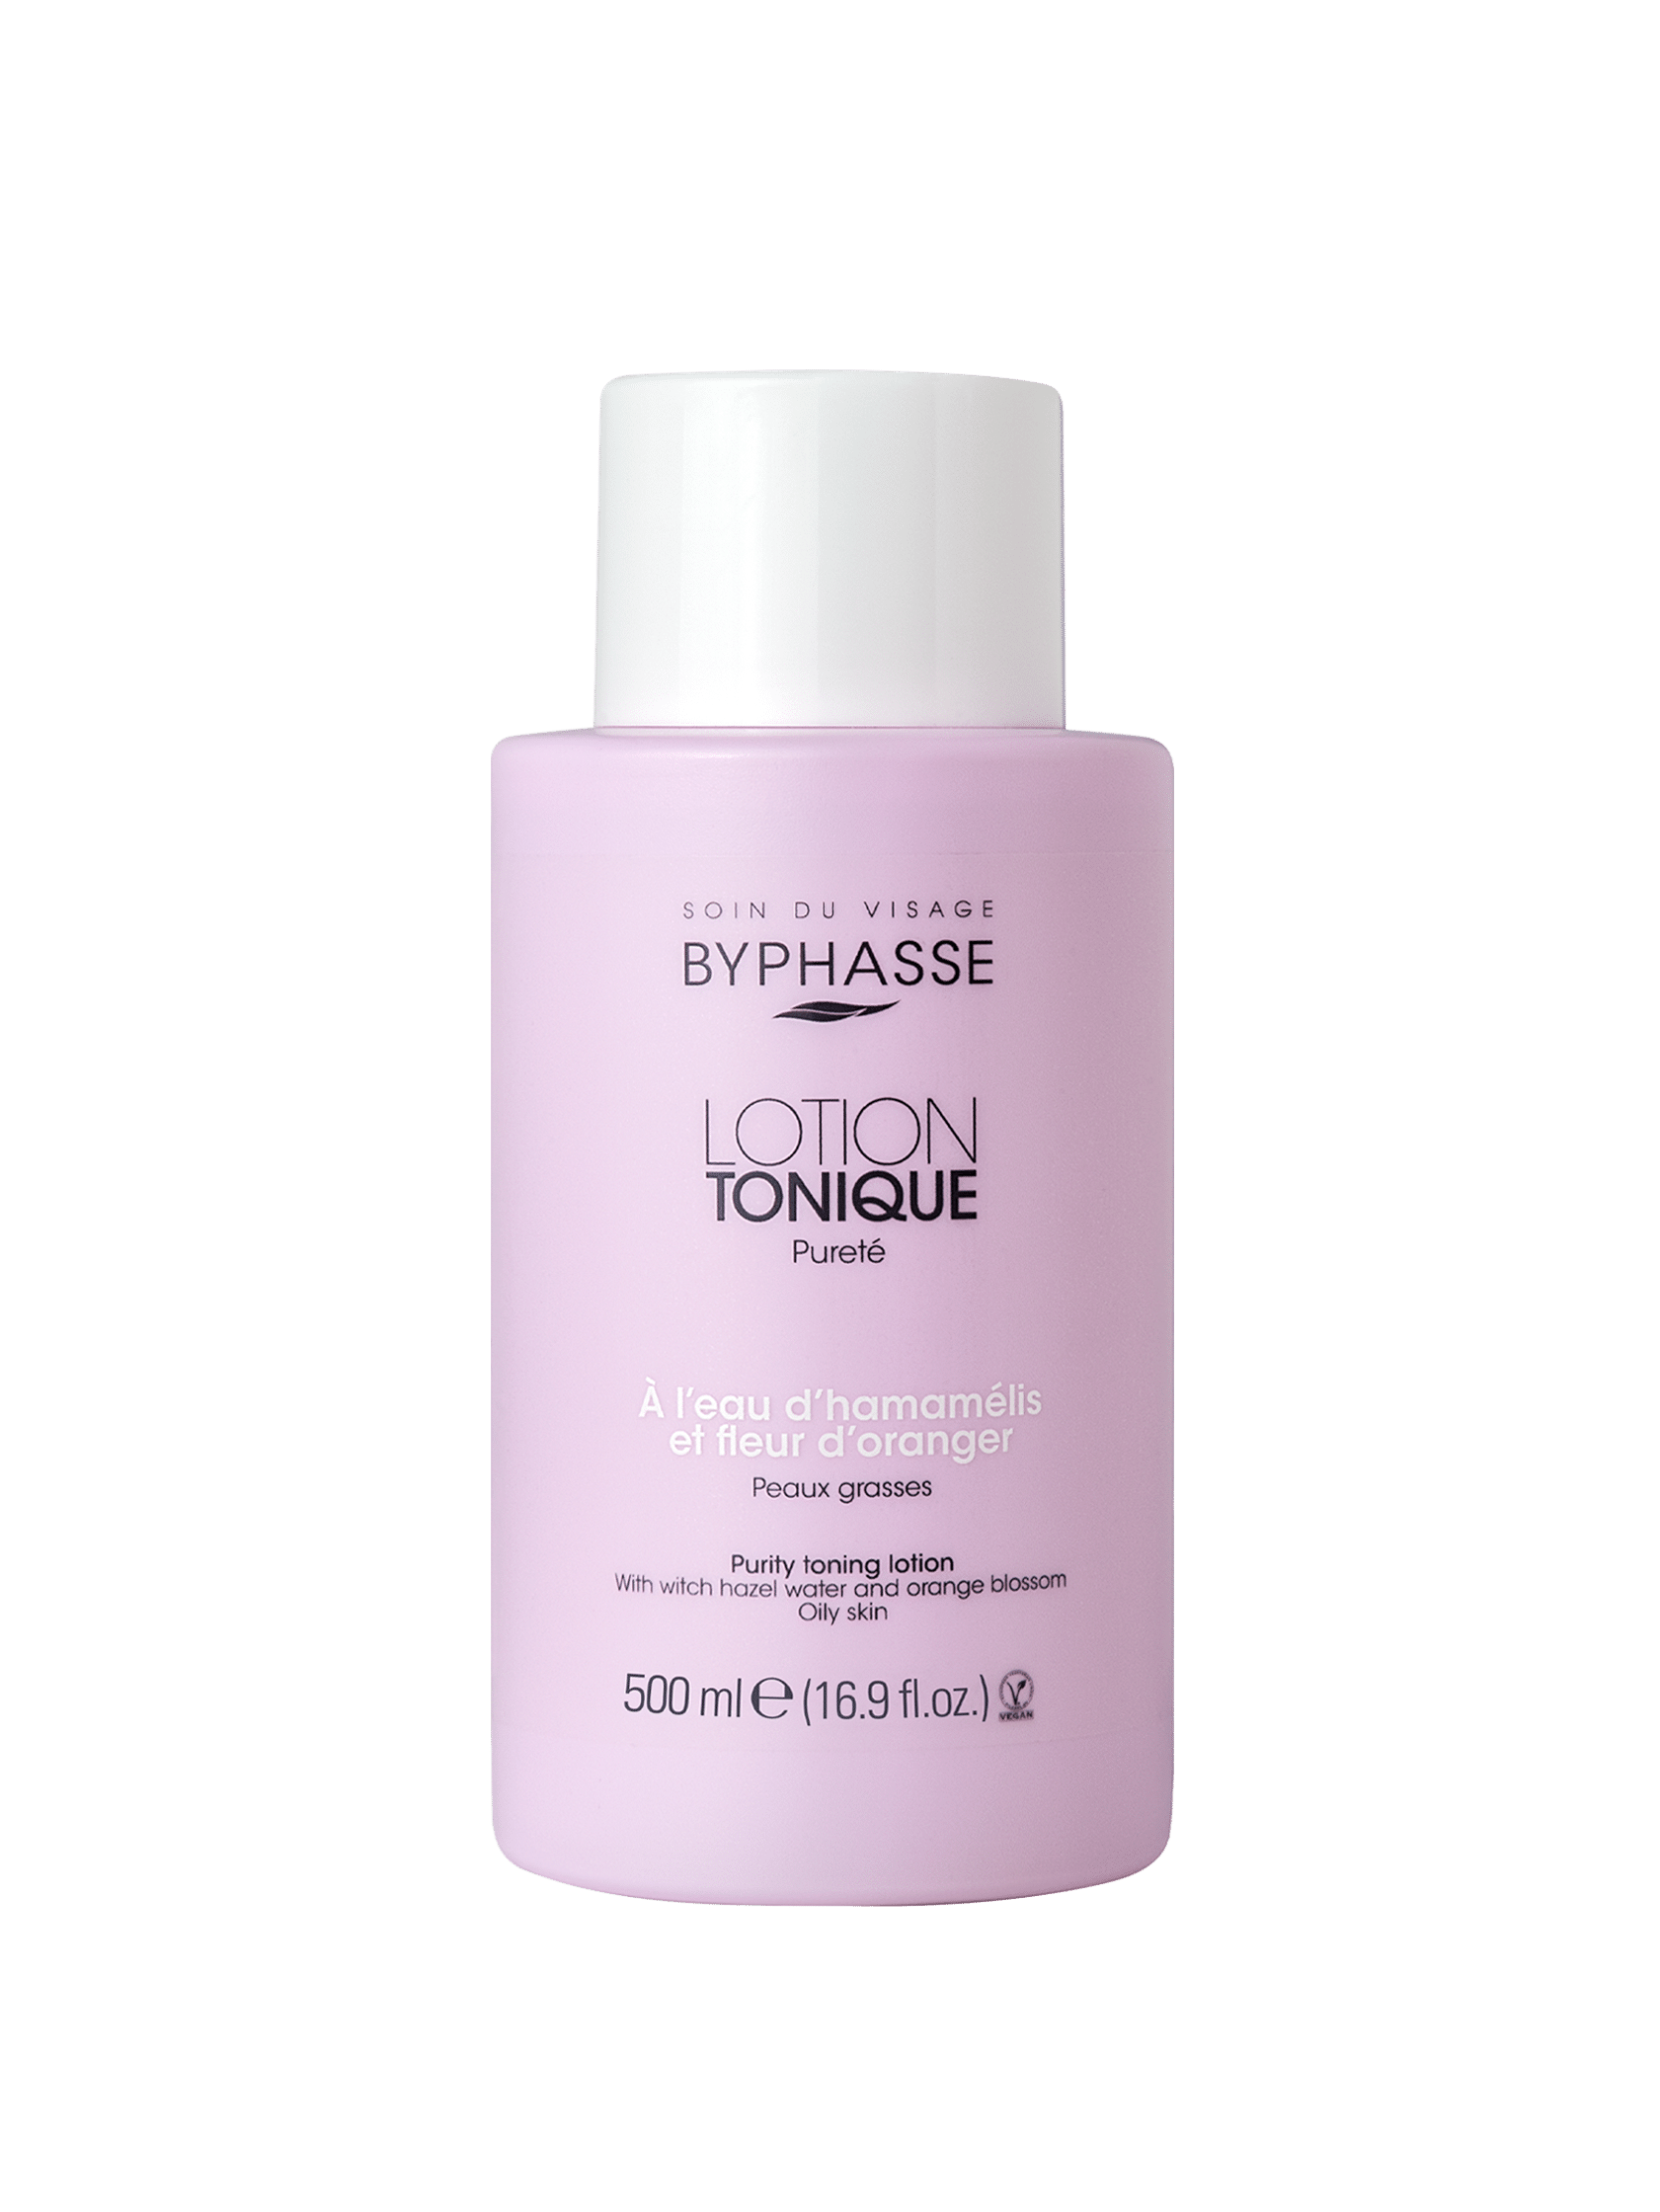 PURITY TONING LOTION OILY SKIN 500ML